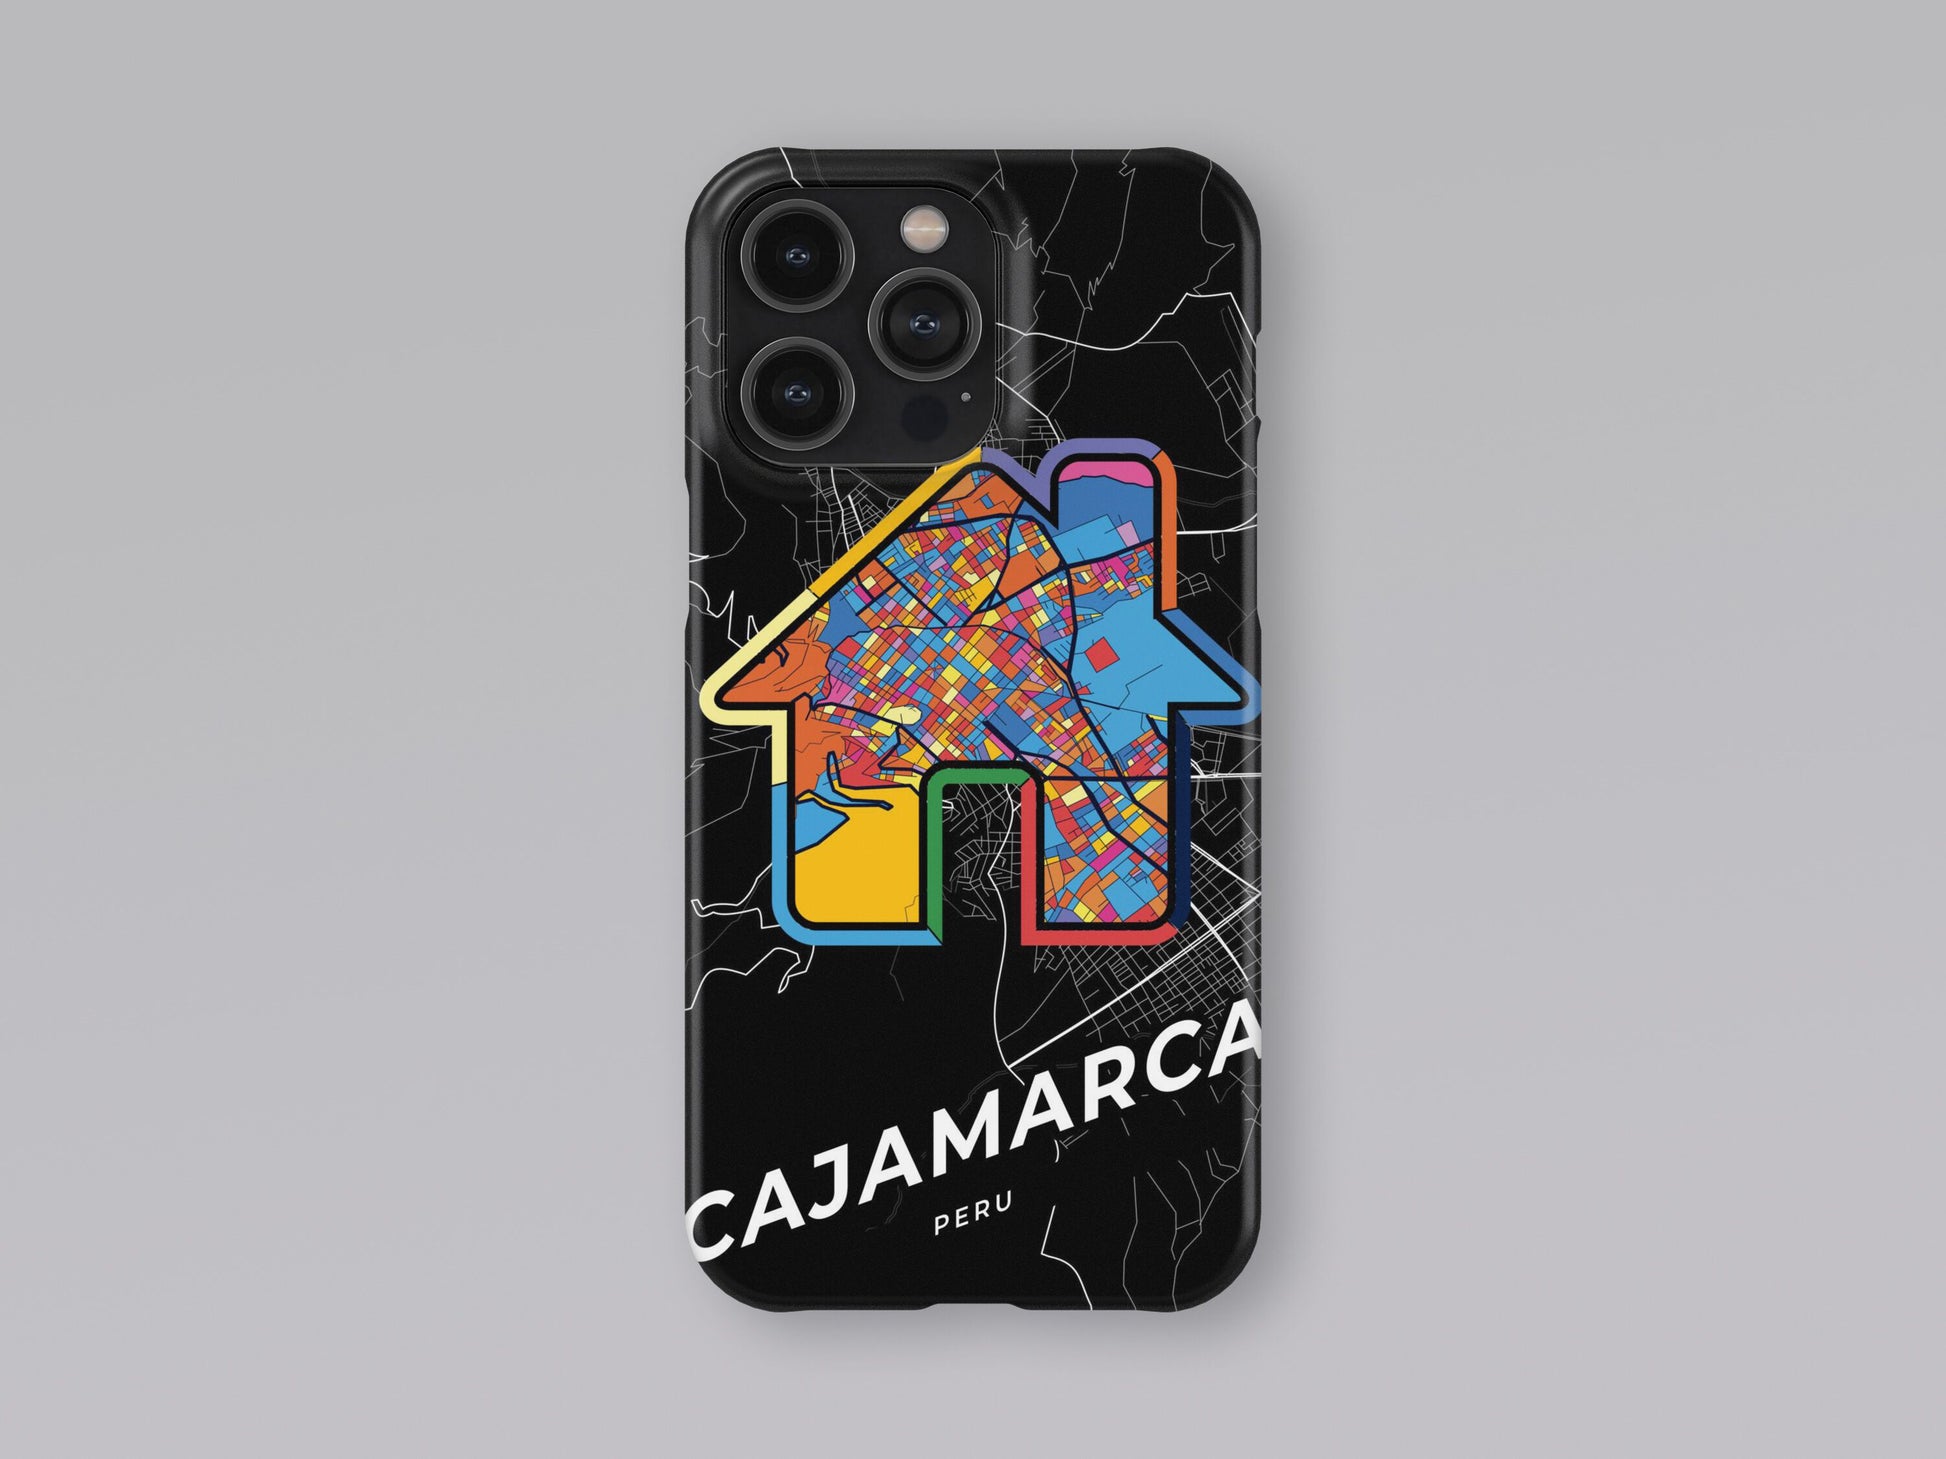 Cajamarca Peru slim phone case with colorful icon. Birthday, wedding or housewarming gift. Couple match cases. 3